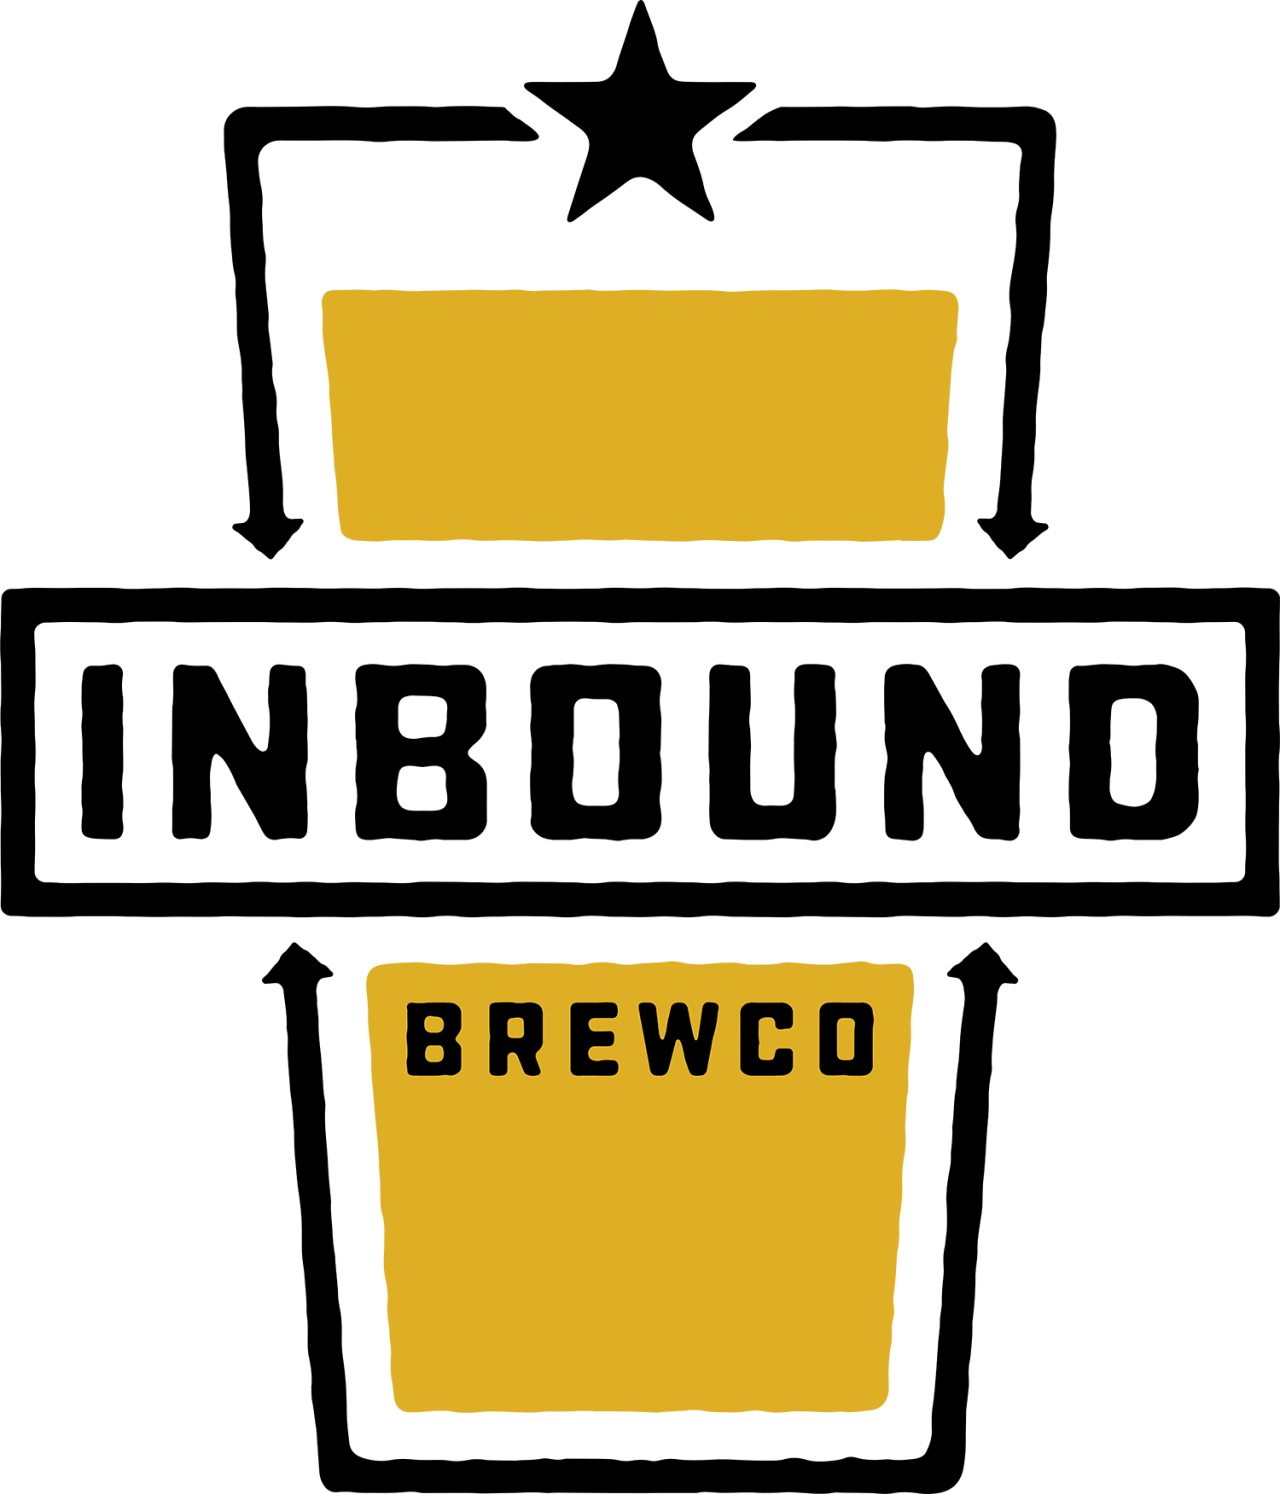 https://www.mncraftbrew.org/wp-content/uploads/2018/06/Inbound-BrewCo-Pint-Glass-Logo-Color-web-1280x1494.png